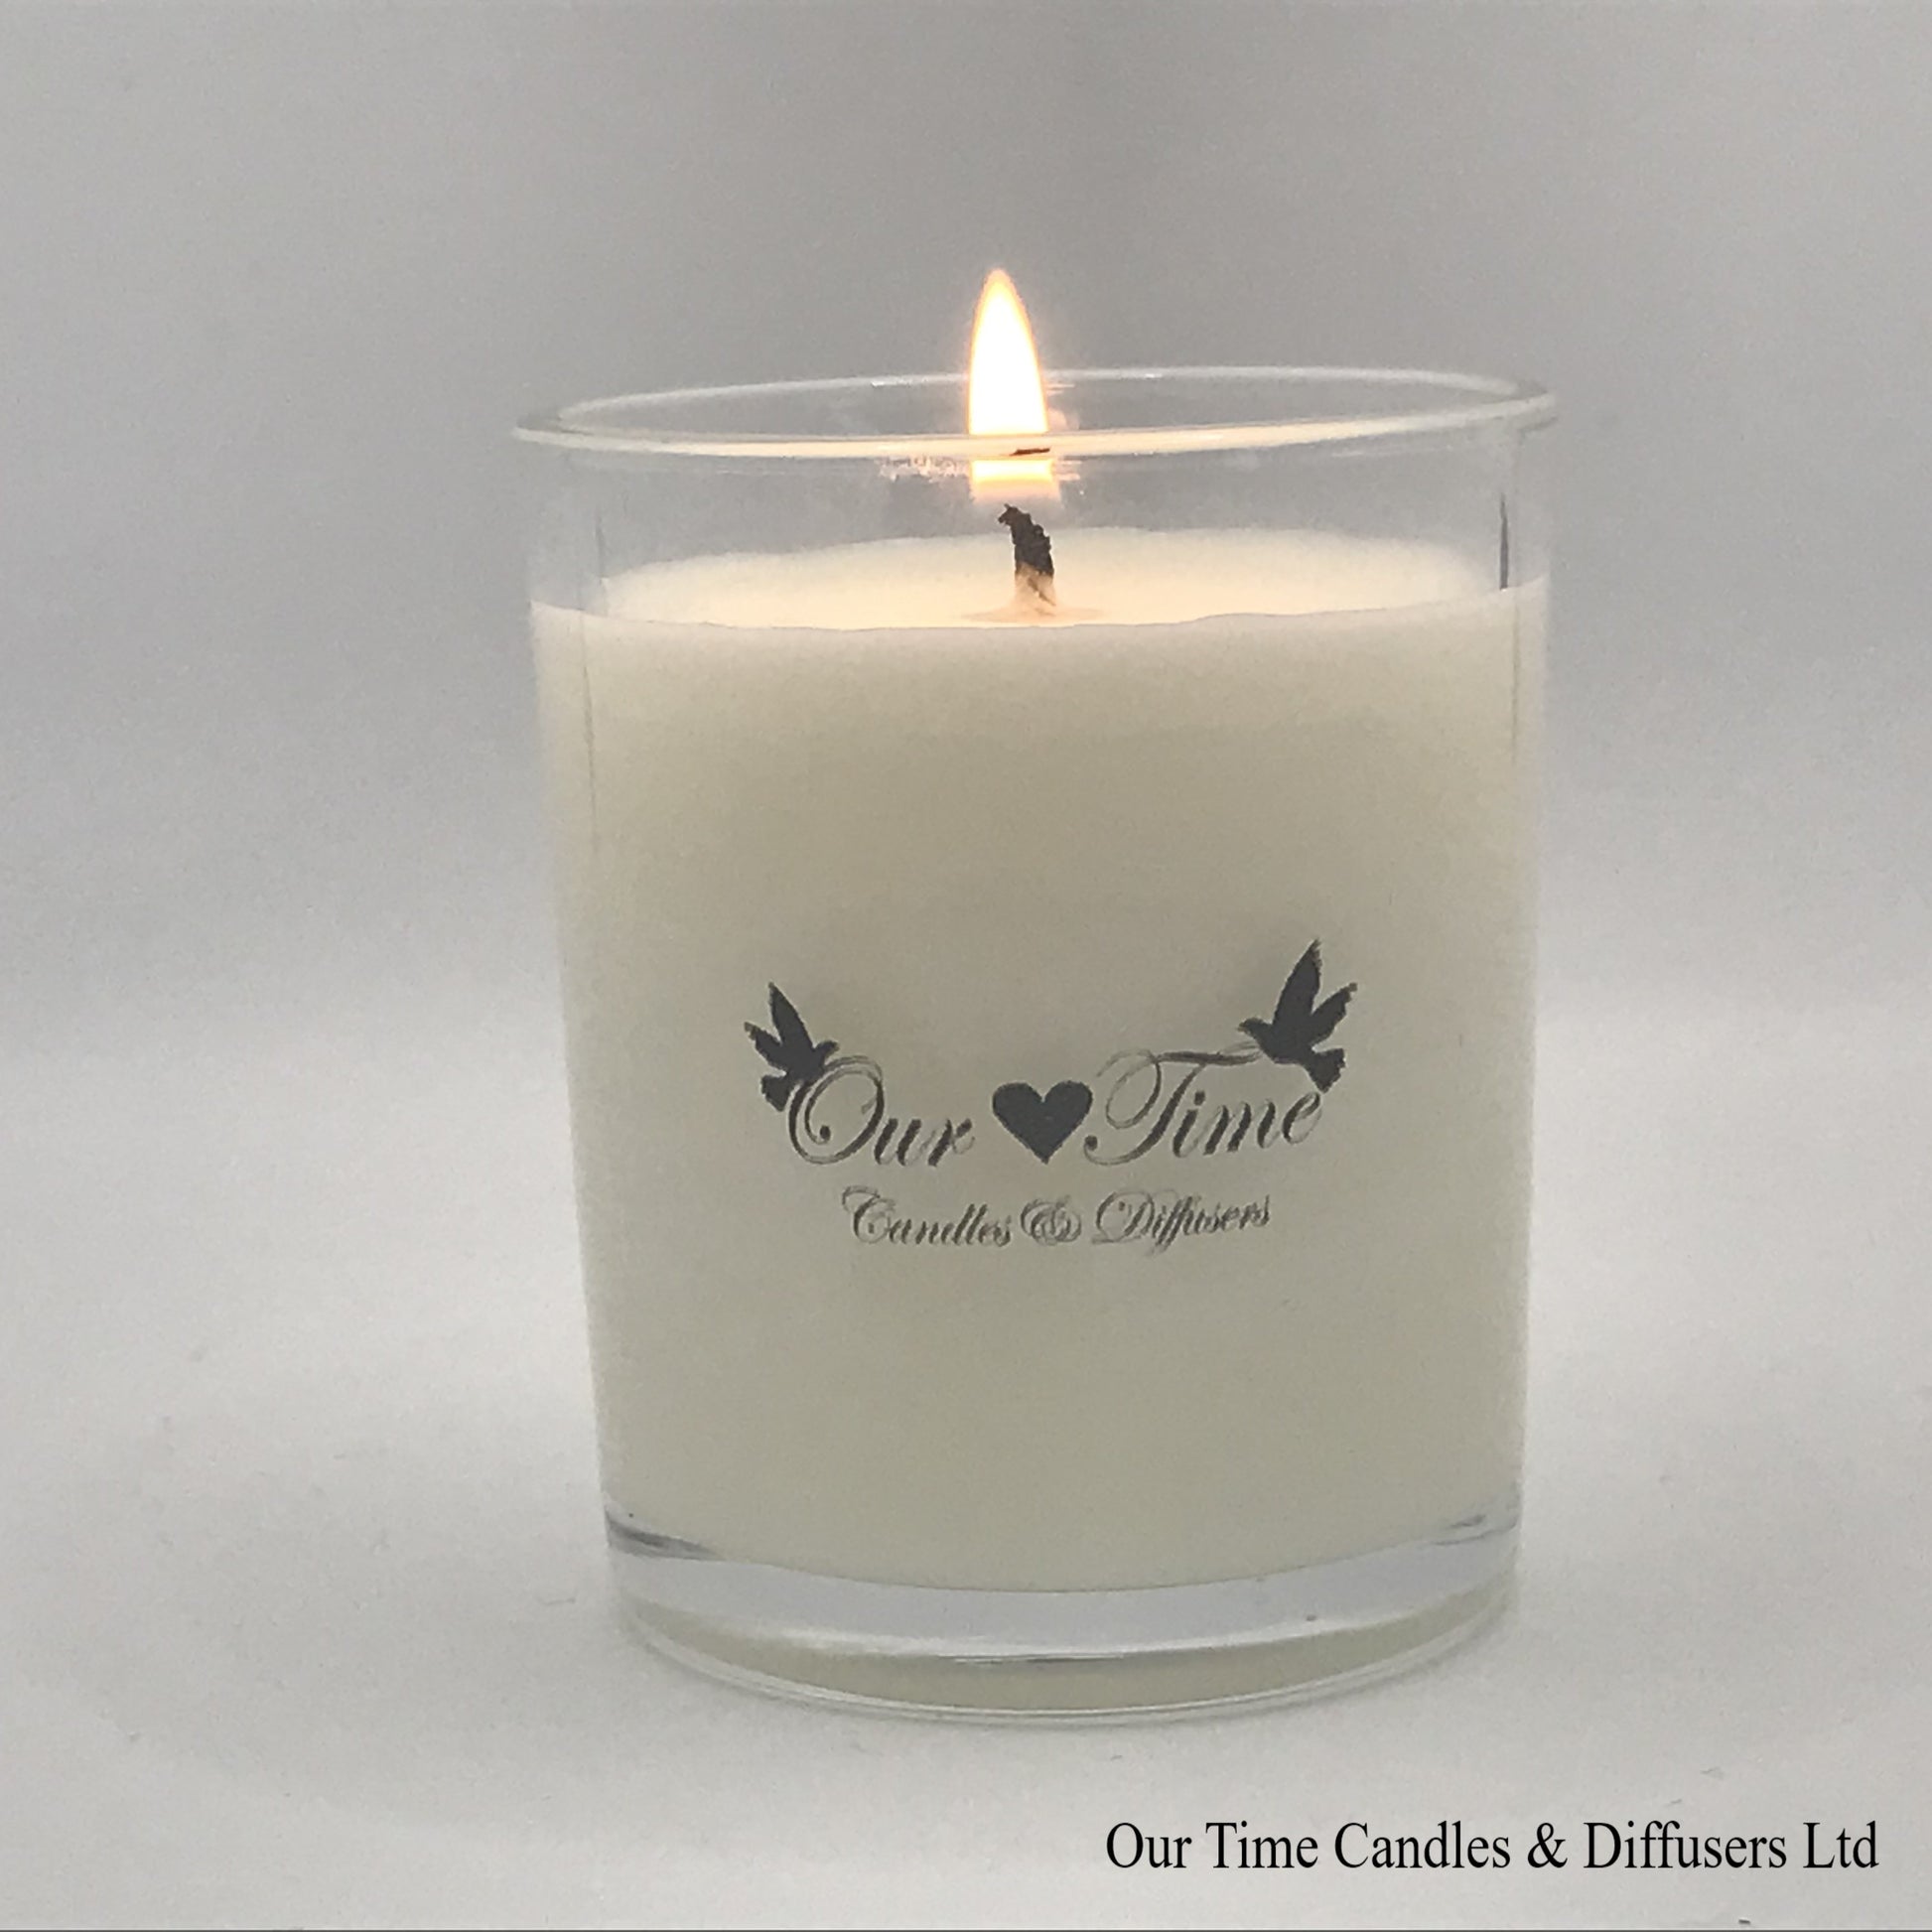 Tropical Fruit scented wax filled soy candle medium